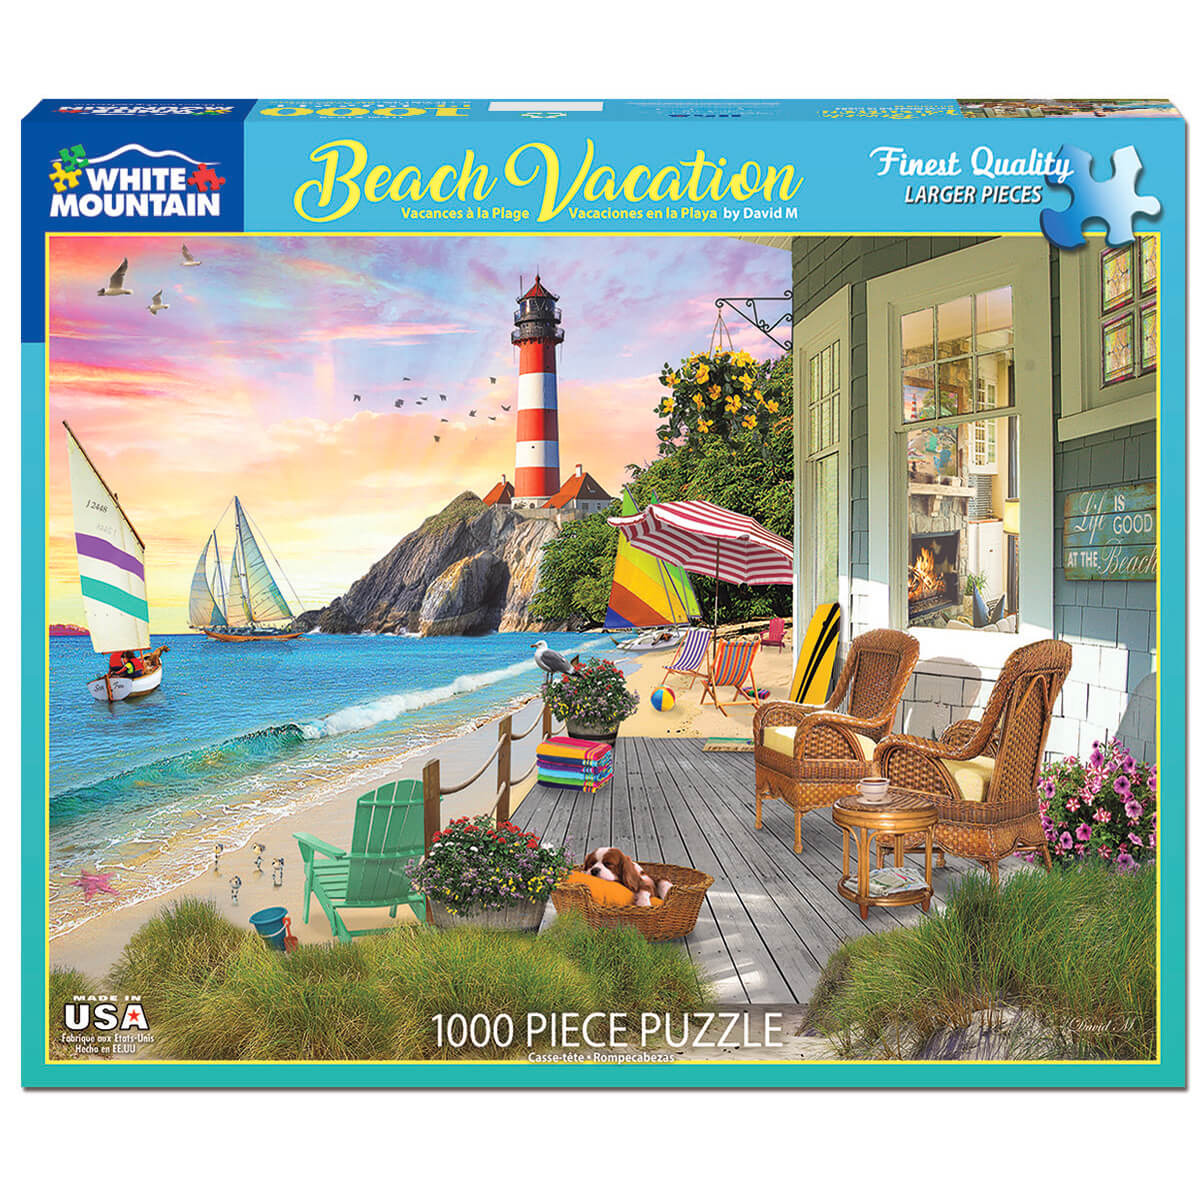 White Mountain Puzzles Beach Vacation 1000 Piece Jigsaw Puzzle